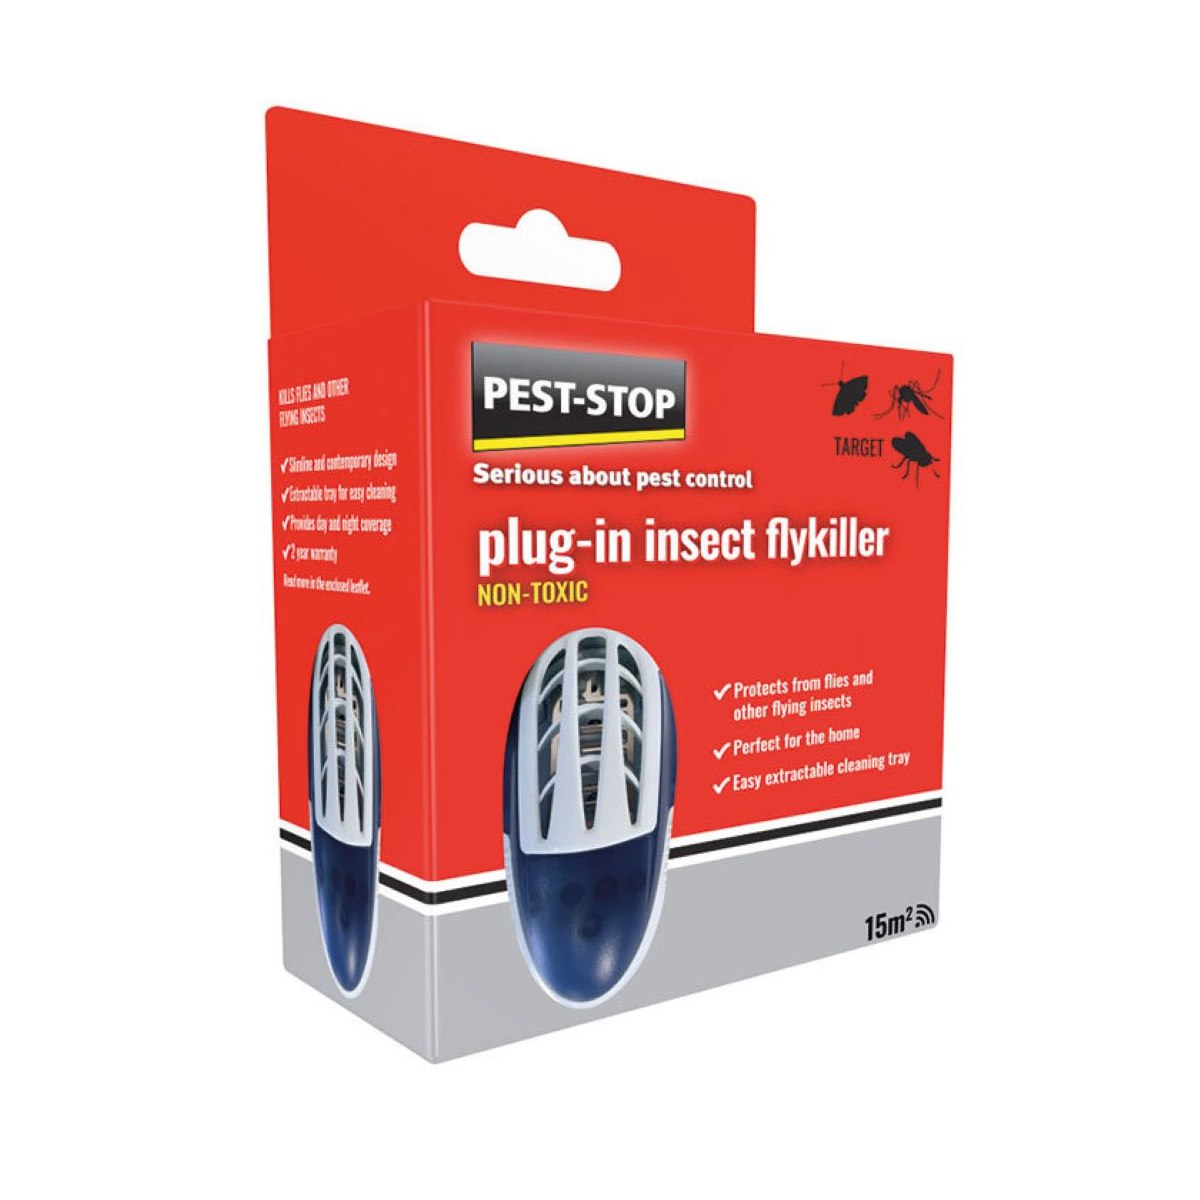 Pest-Stop Plug-In Insect Flykiller